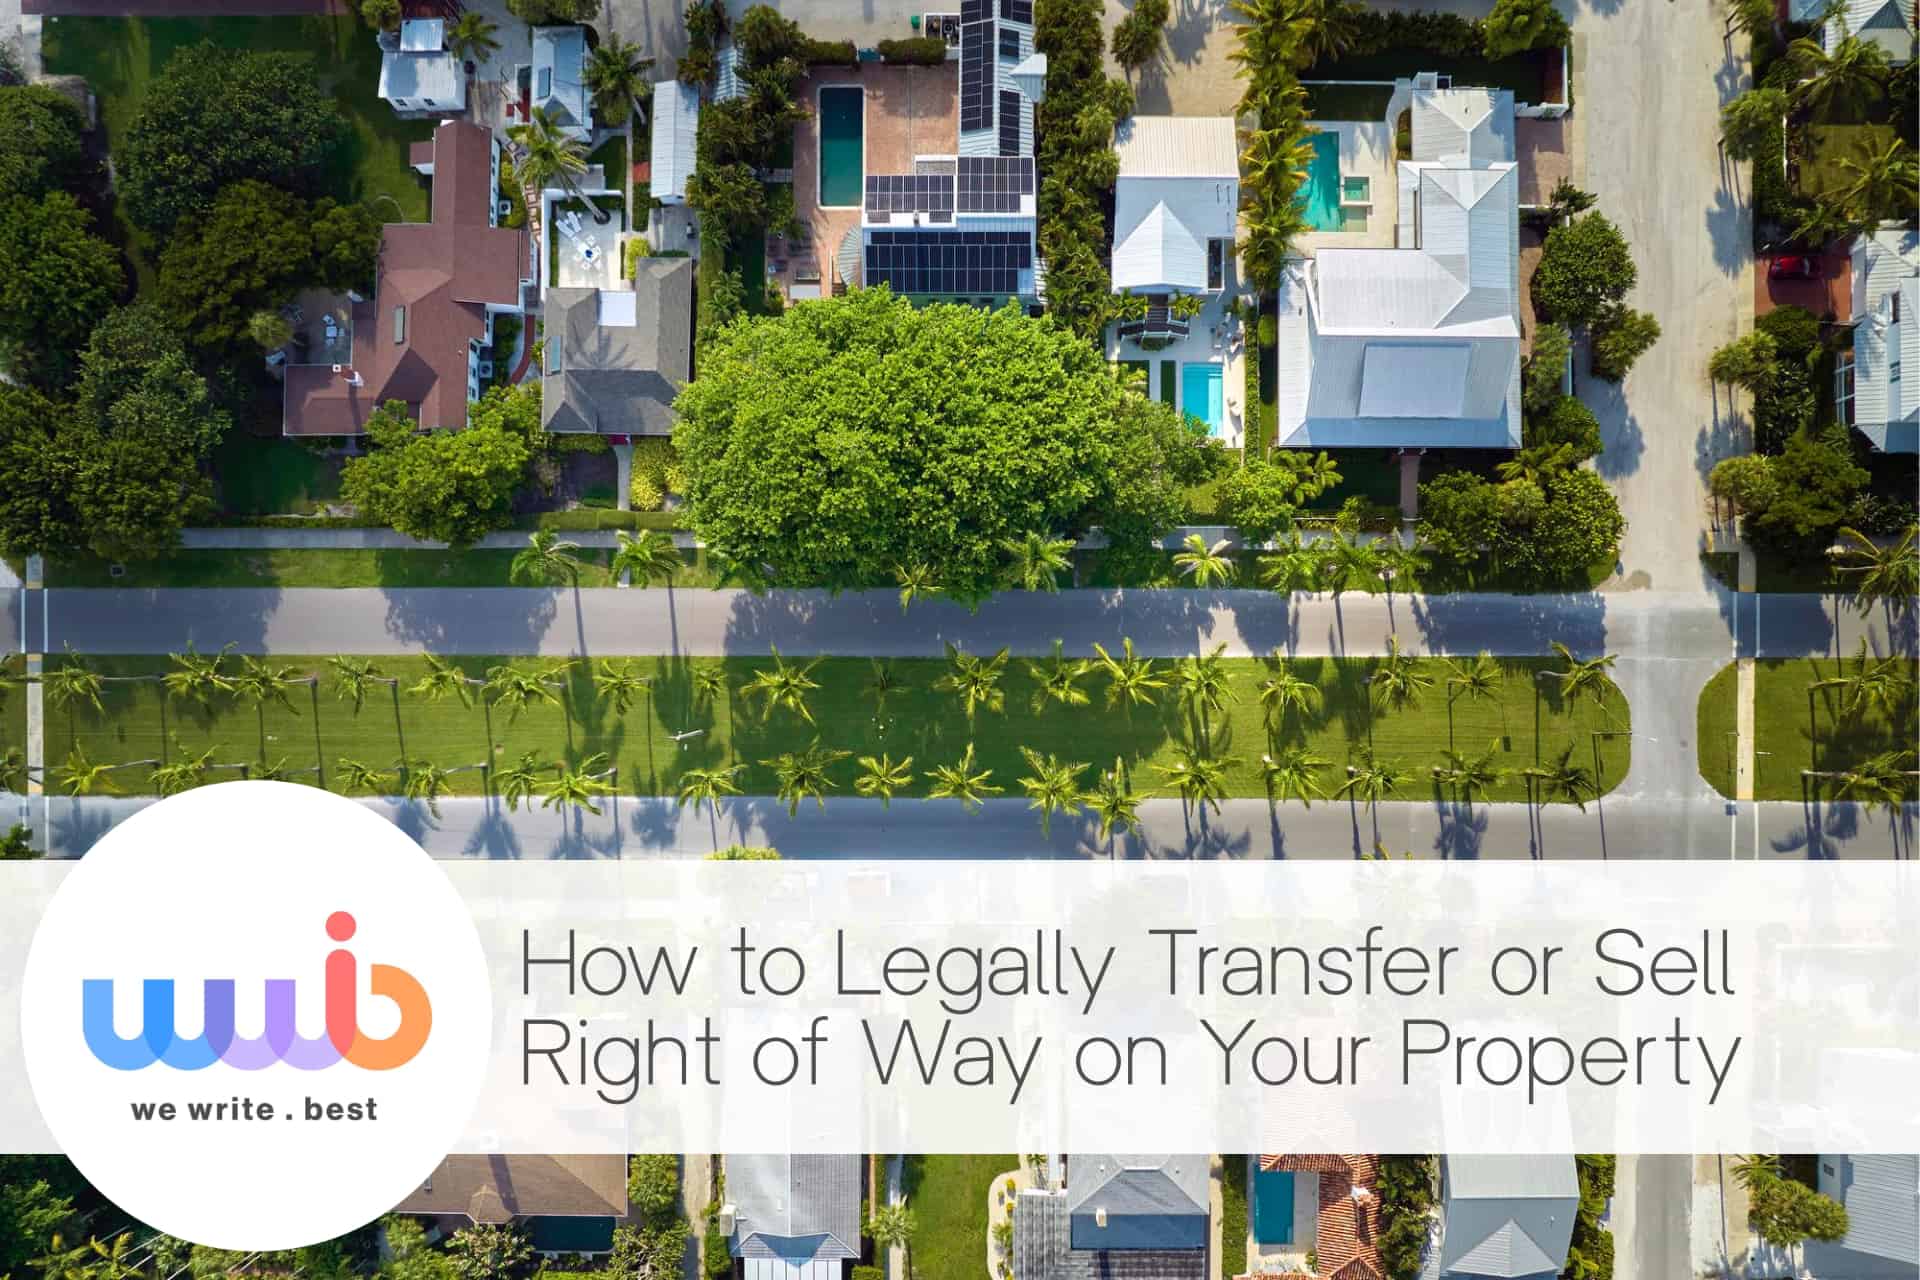 How to Legally Transfer or Sell Right of Way on Your Property